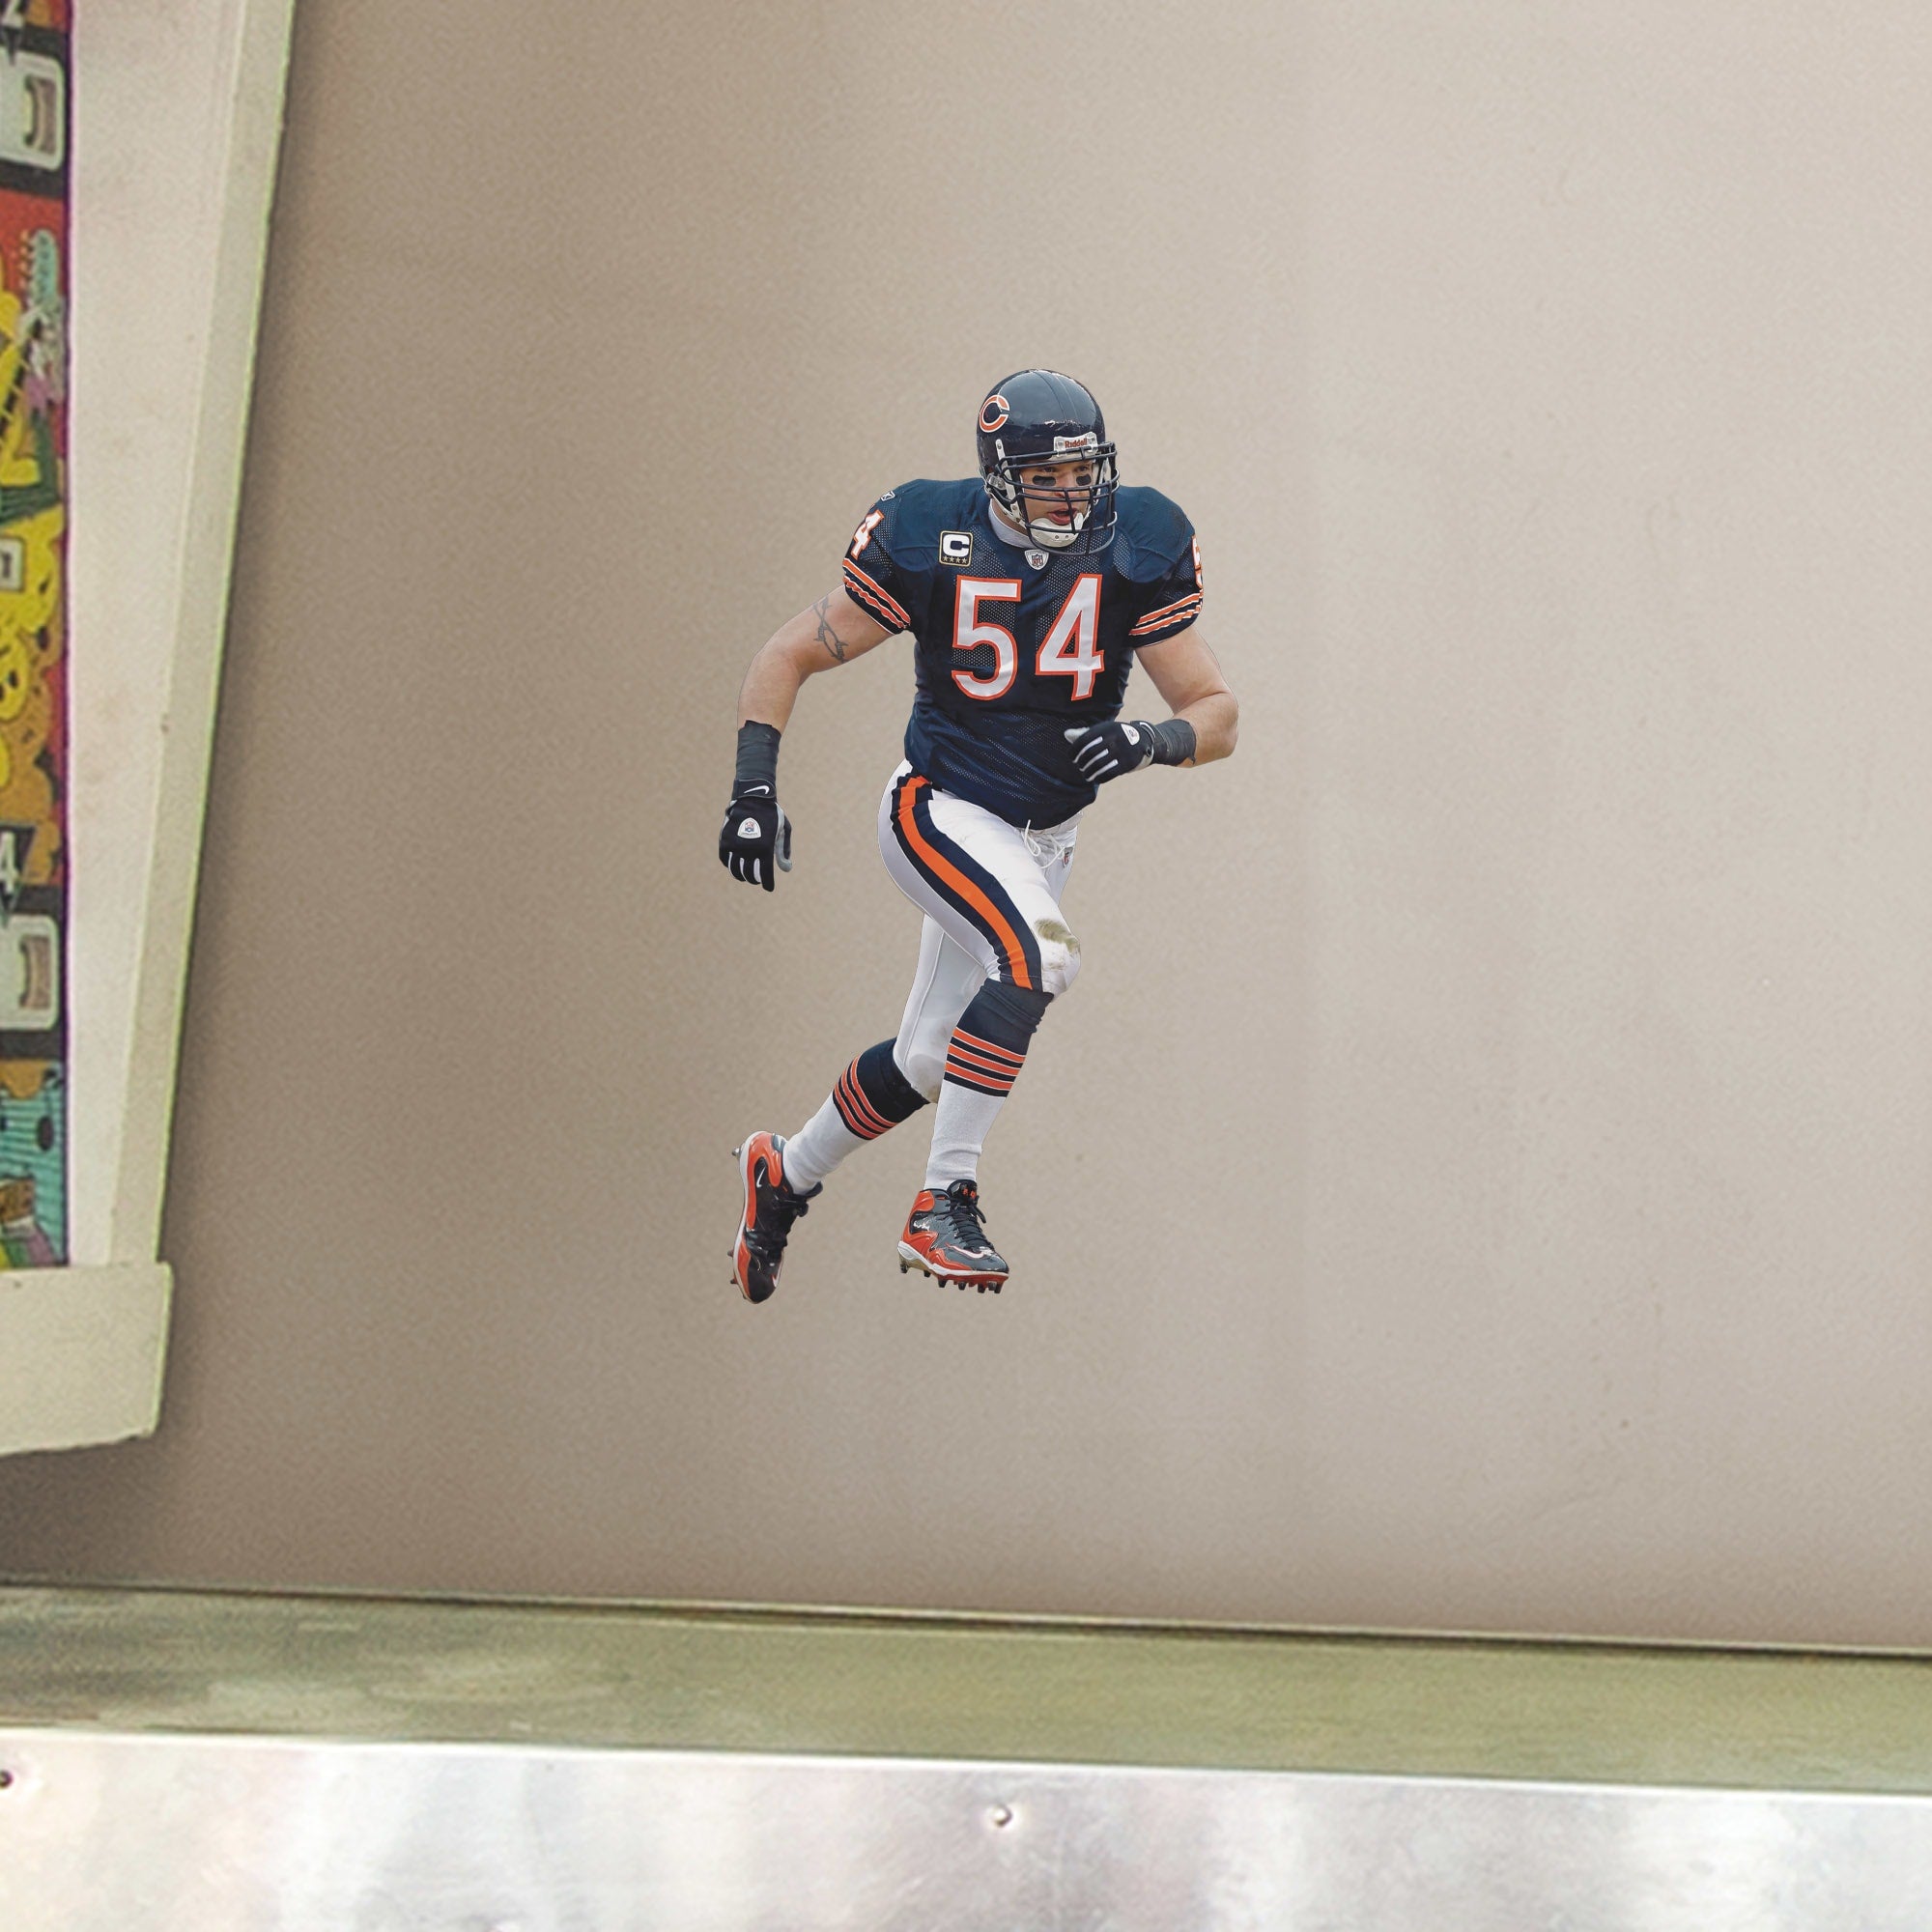 Brian Urlacher for Chicago Bears: Legend - Officially Licensed NFL Removable Wall Decal Large by Fathead | Vinyl